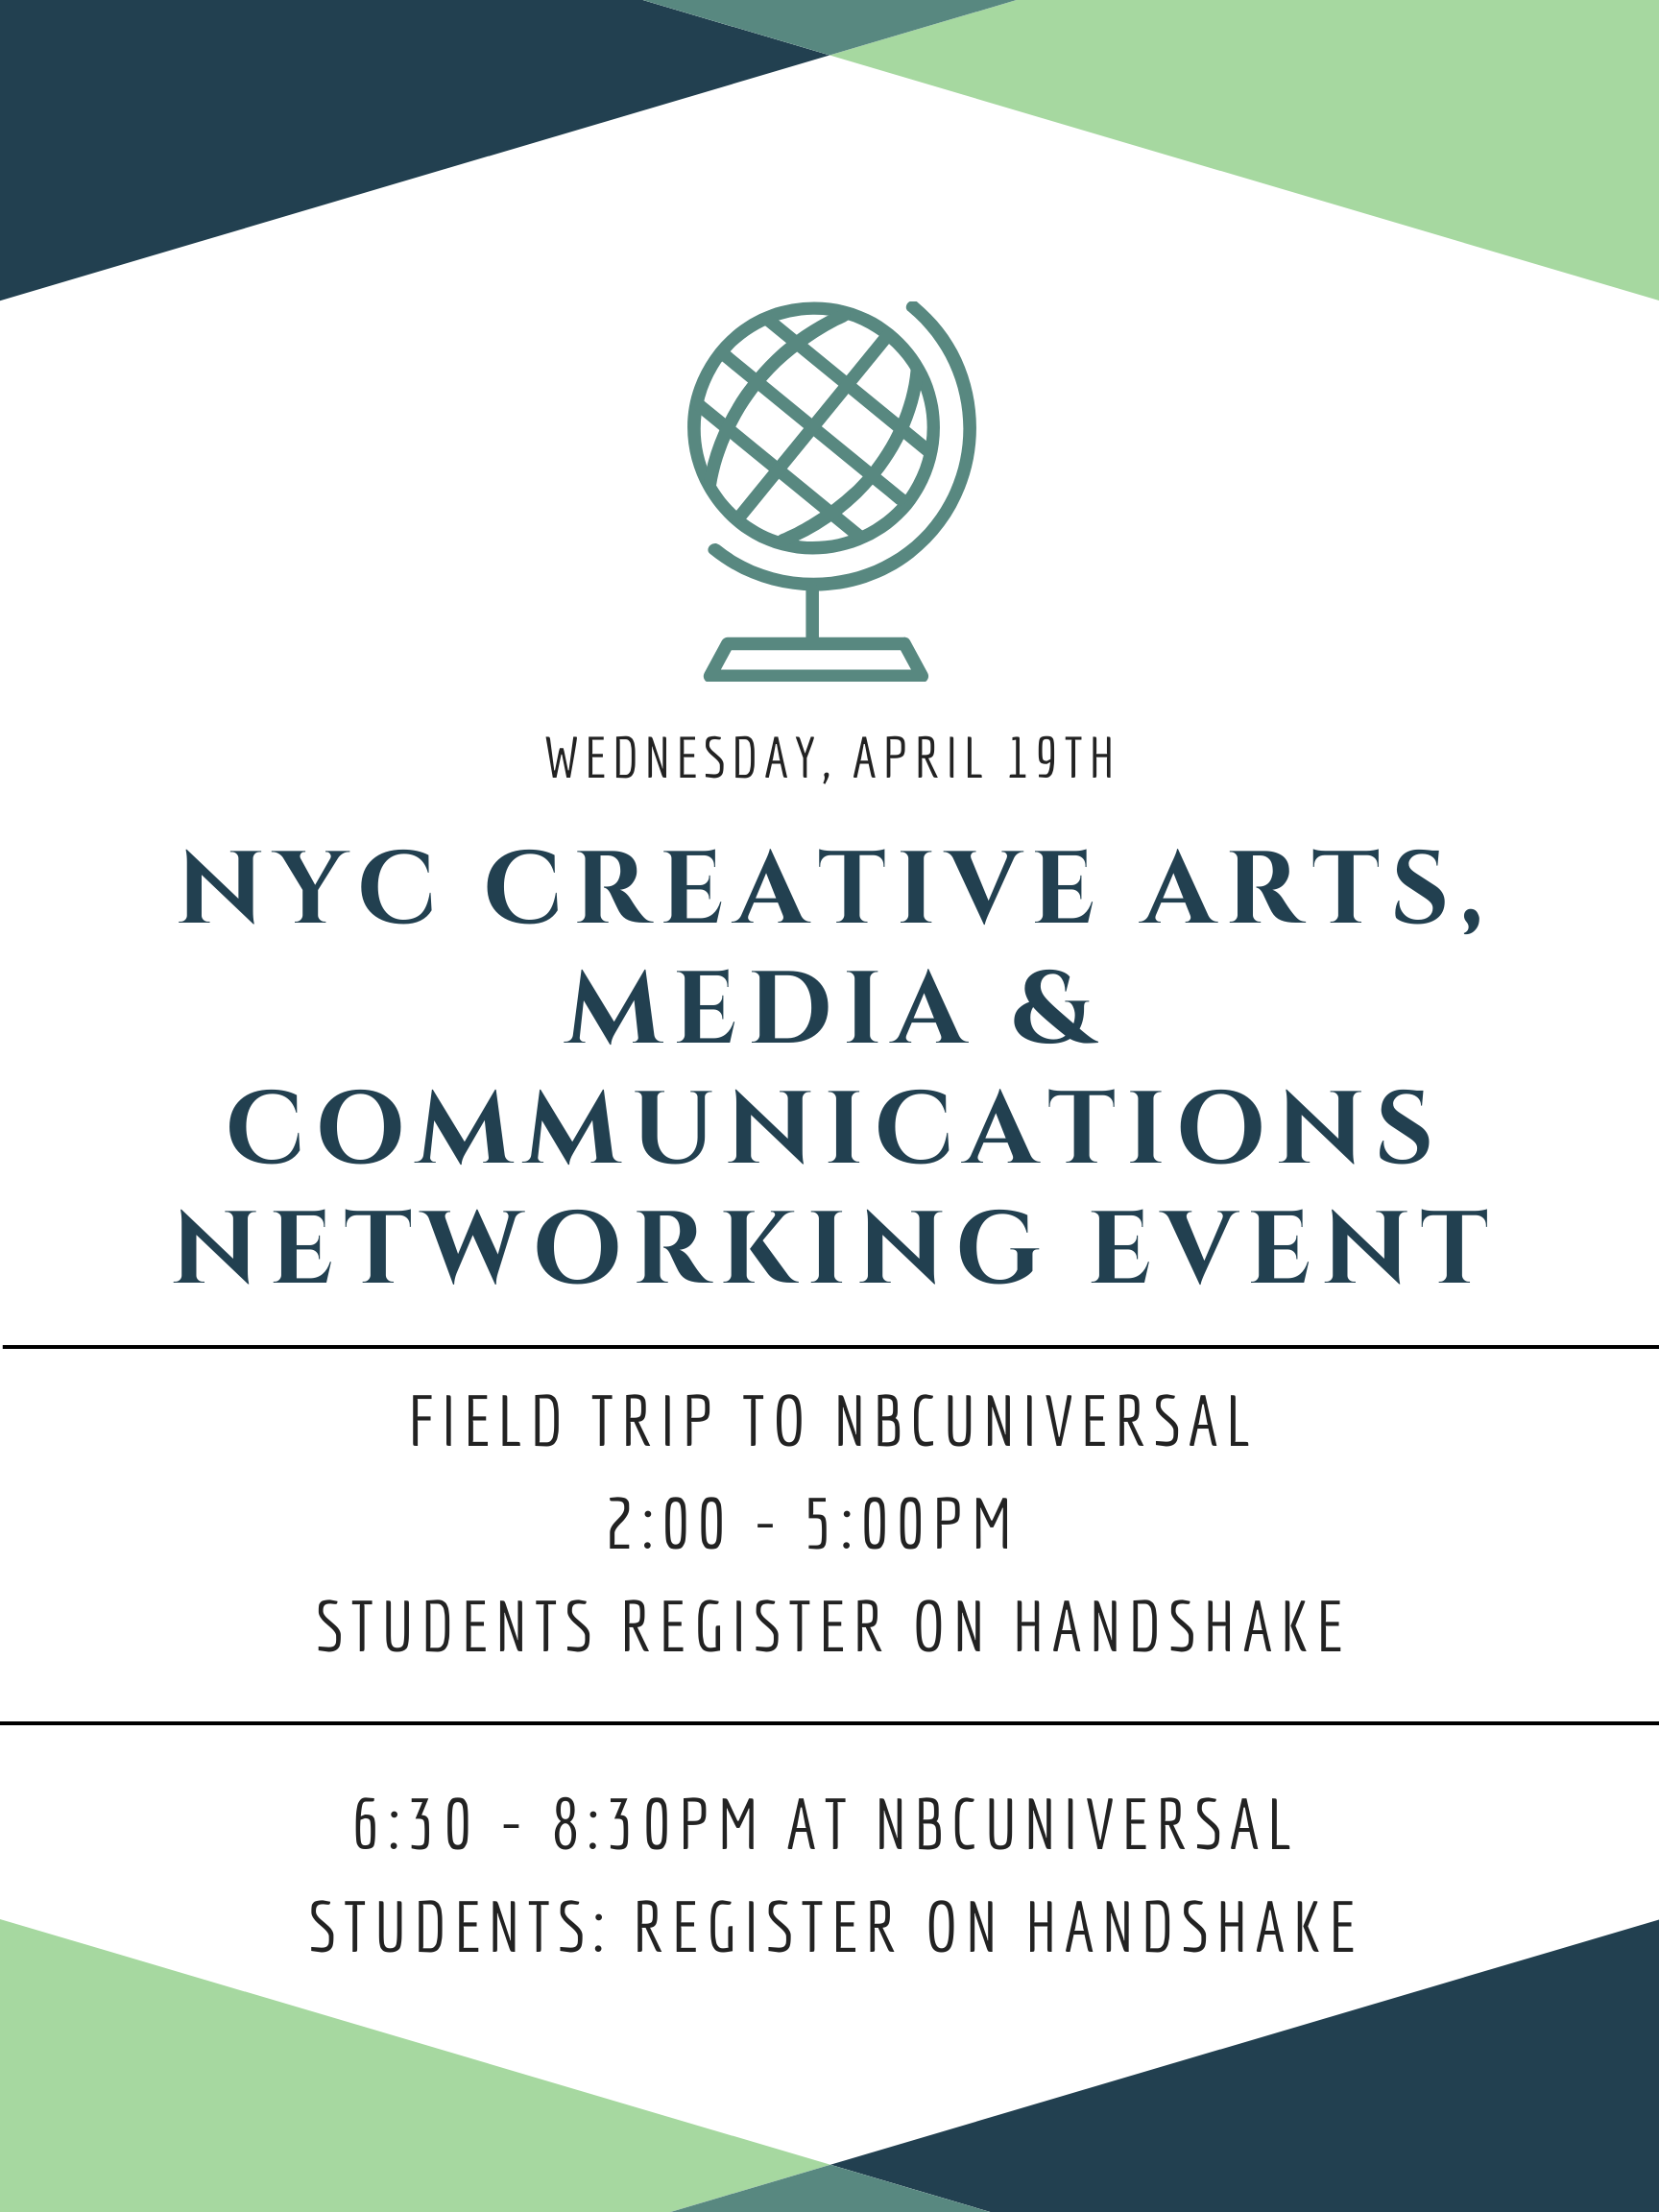 NYC Creative Arts, Media & Communications Networking Event, April 19th